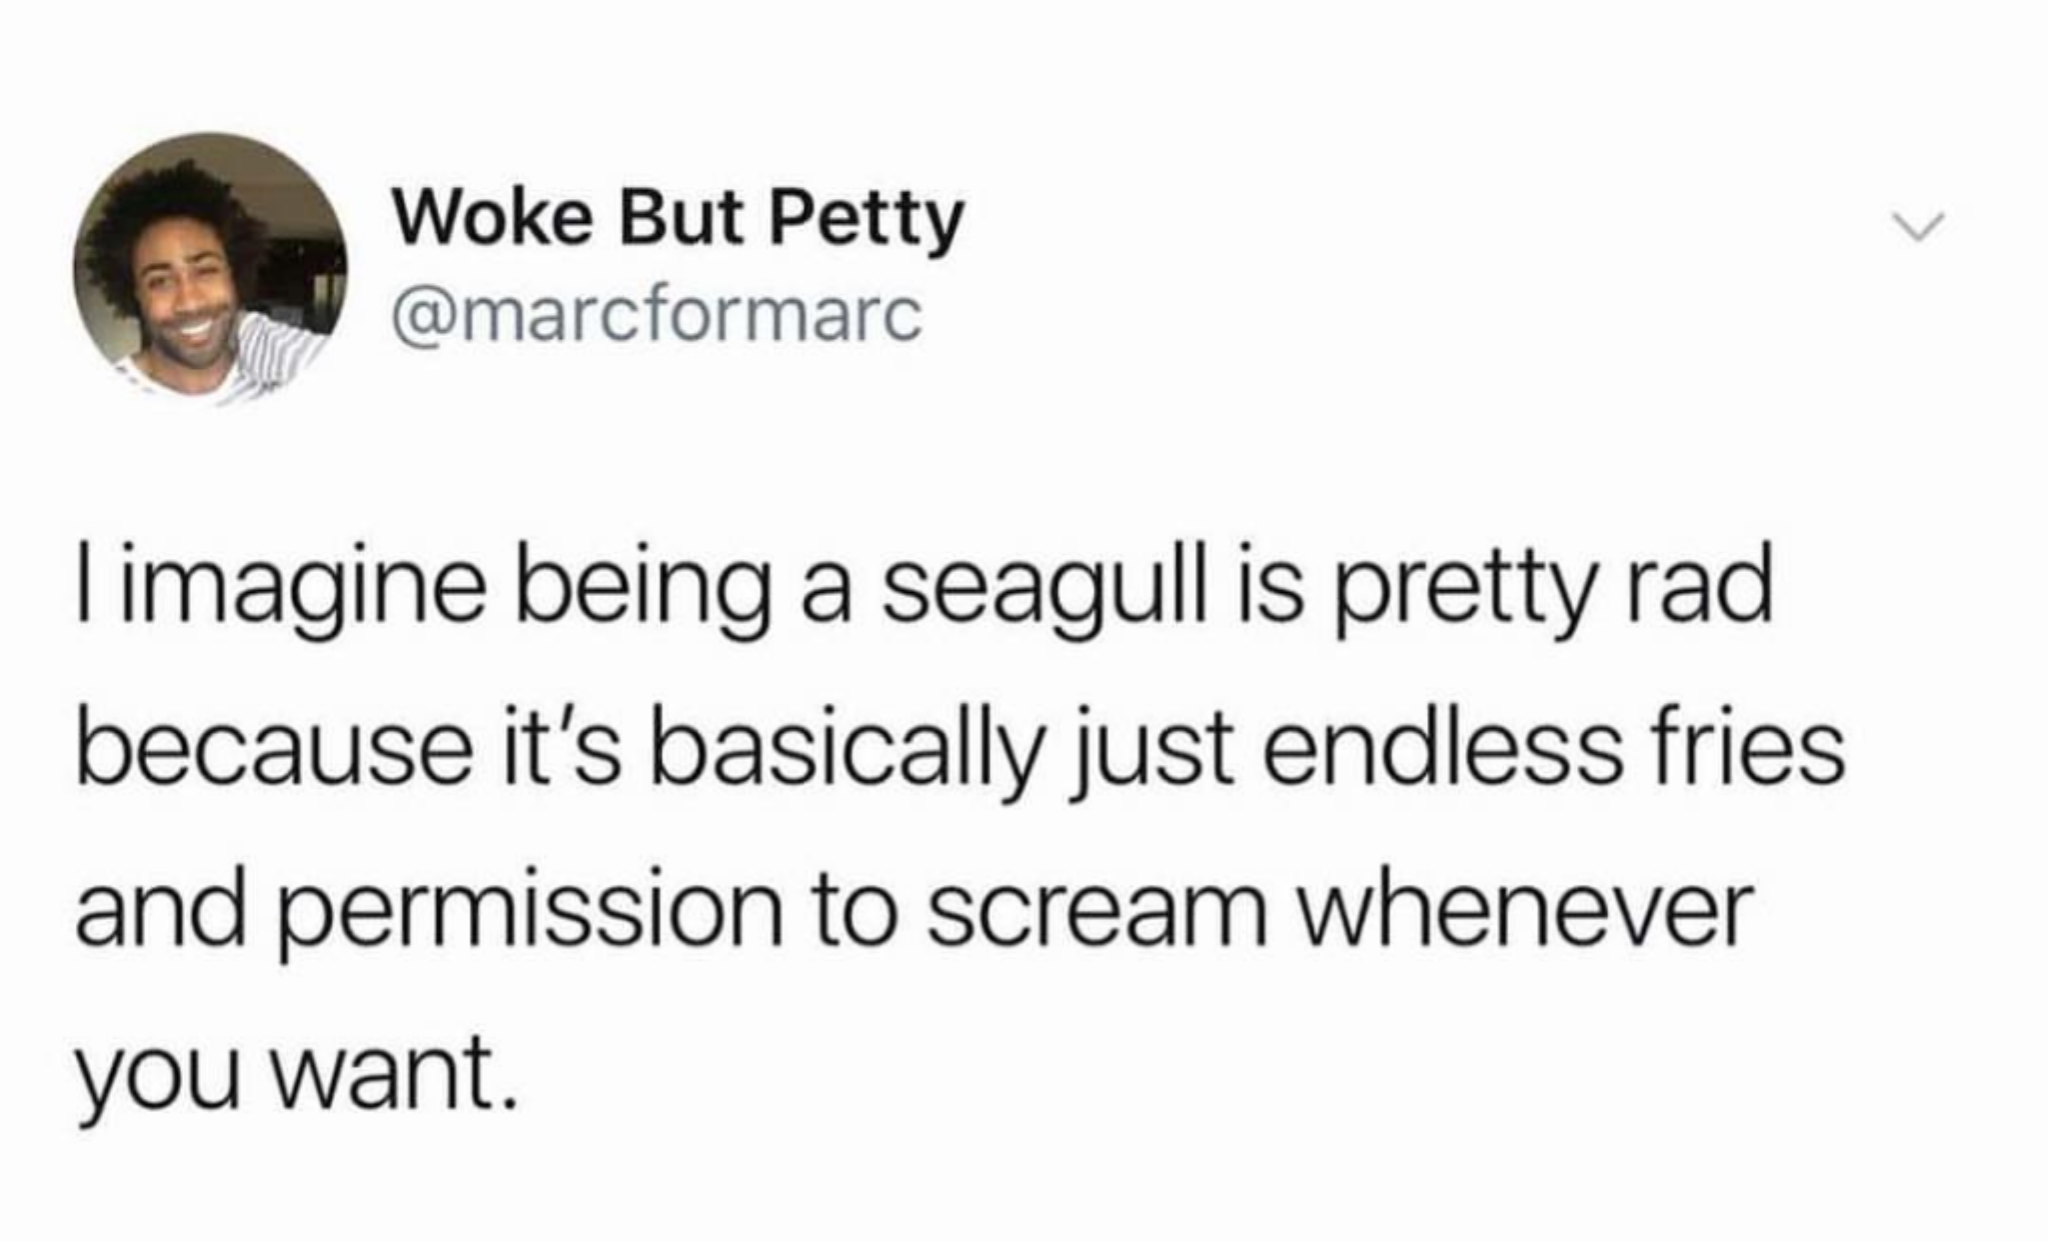 monday morning randomness -  we need to talk spicy armpits - Woke But Petty I imagine being a seagull is pretty rad because it's basically just endless fries and permission to scream whenever you want.